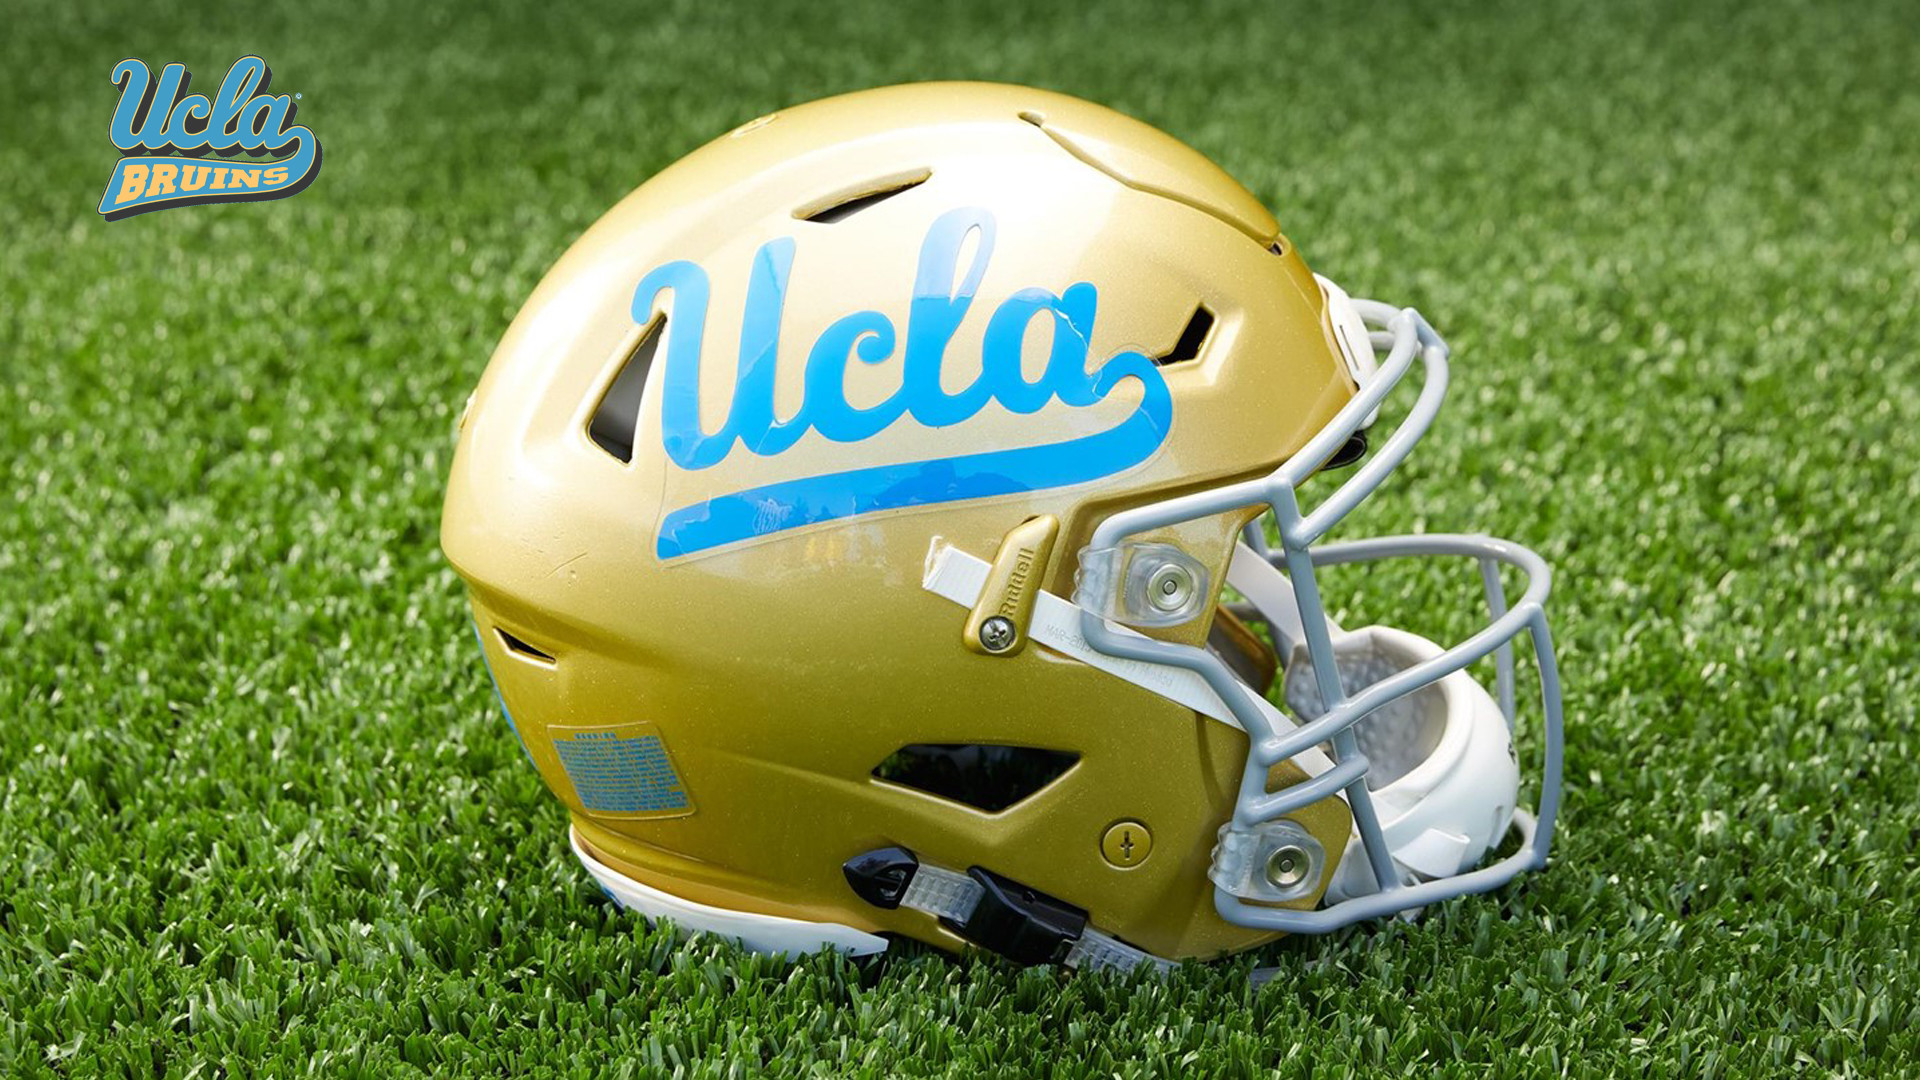 1920x1080 What a cool UCLA wallpaper it is, an awesome close up photo of UCLA Bruins  football team helmet on grass. The photo was configured into high  resolution with ...